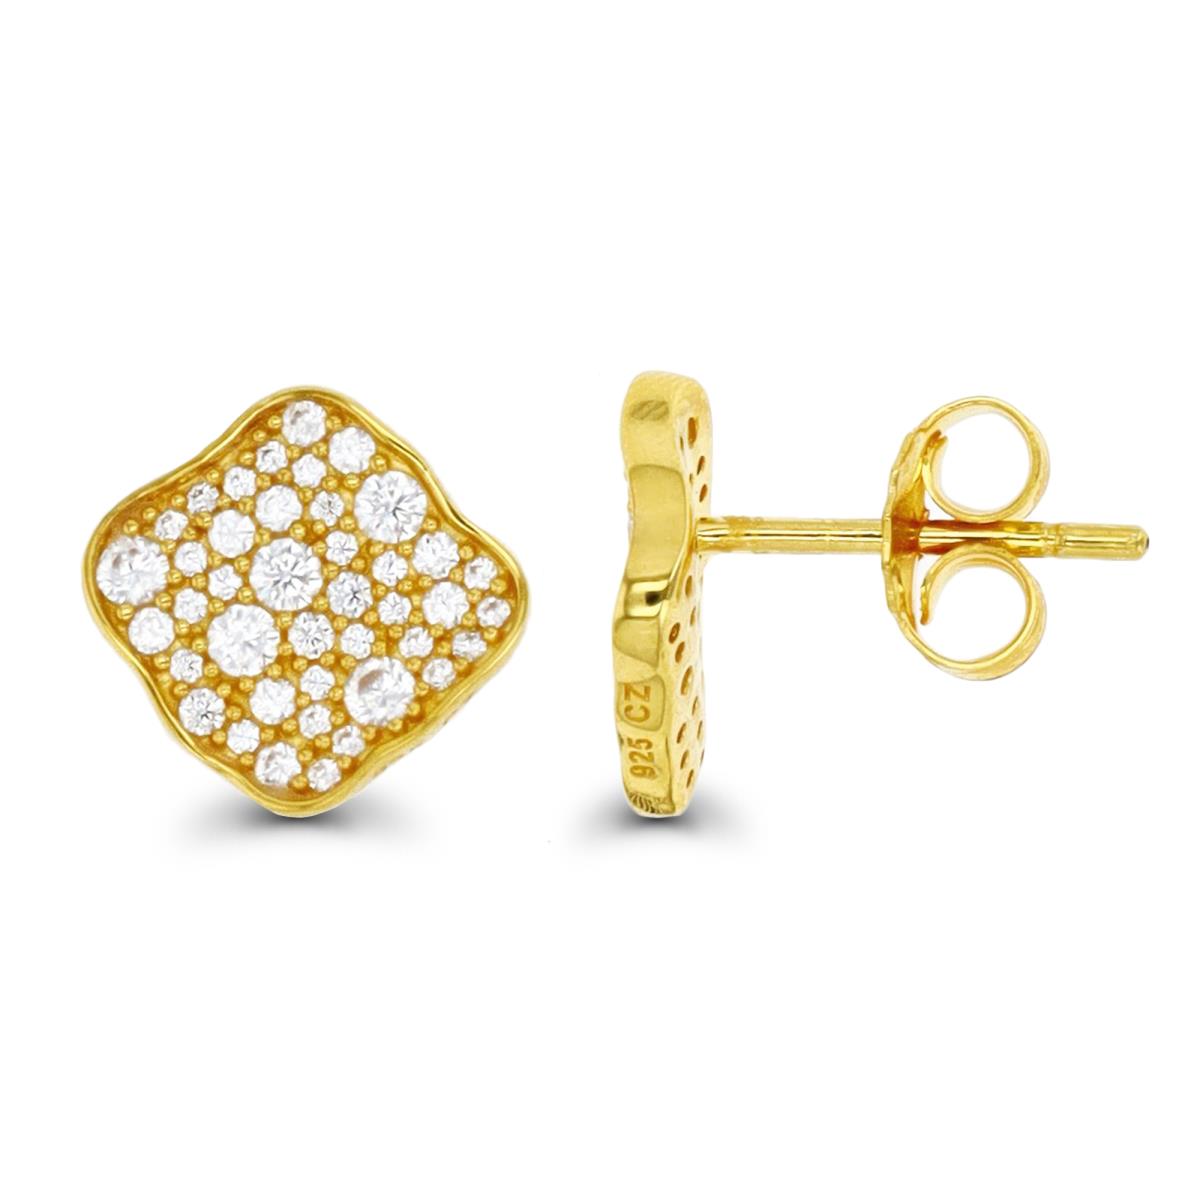  Sterling Silver Yellow 10X1.7MM Polished White CZ Pave Irregular Flower Stud Earring